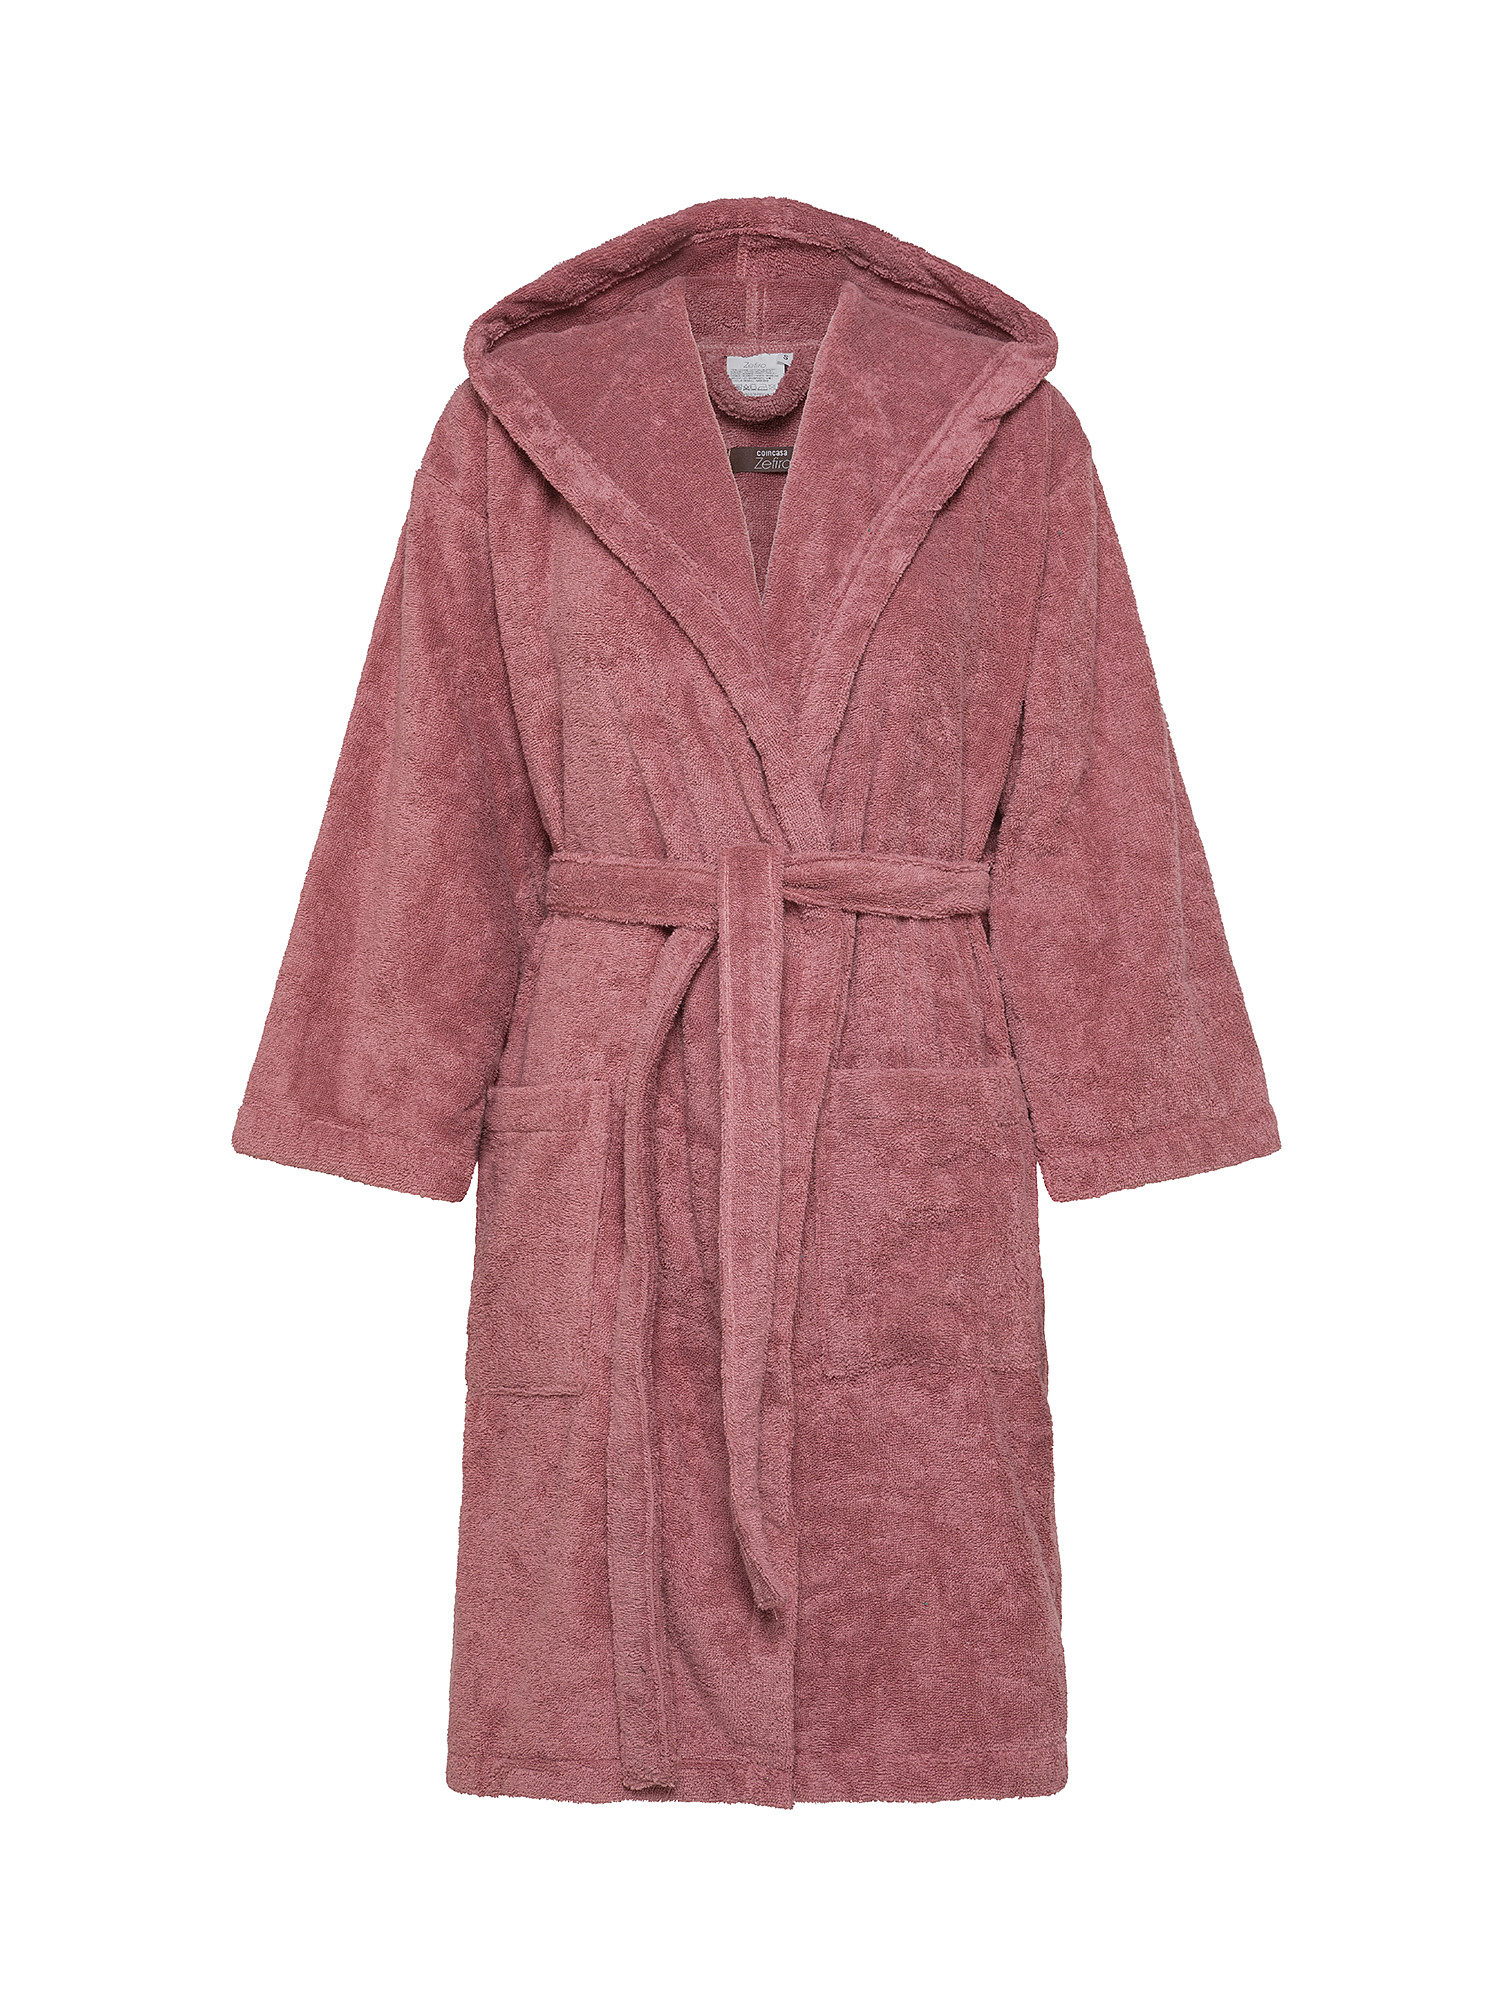 Zefiro solid color 100% cotton bathrobe, Pink, large image number 0